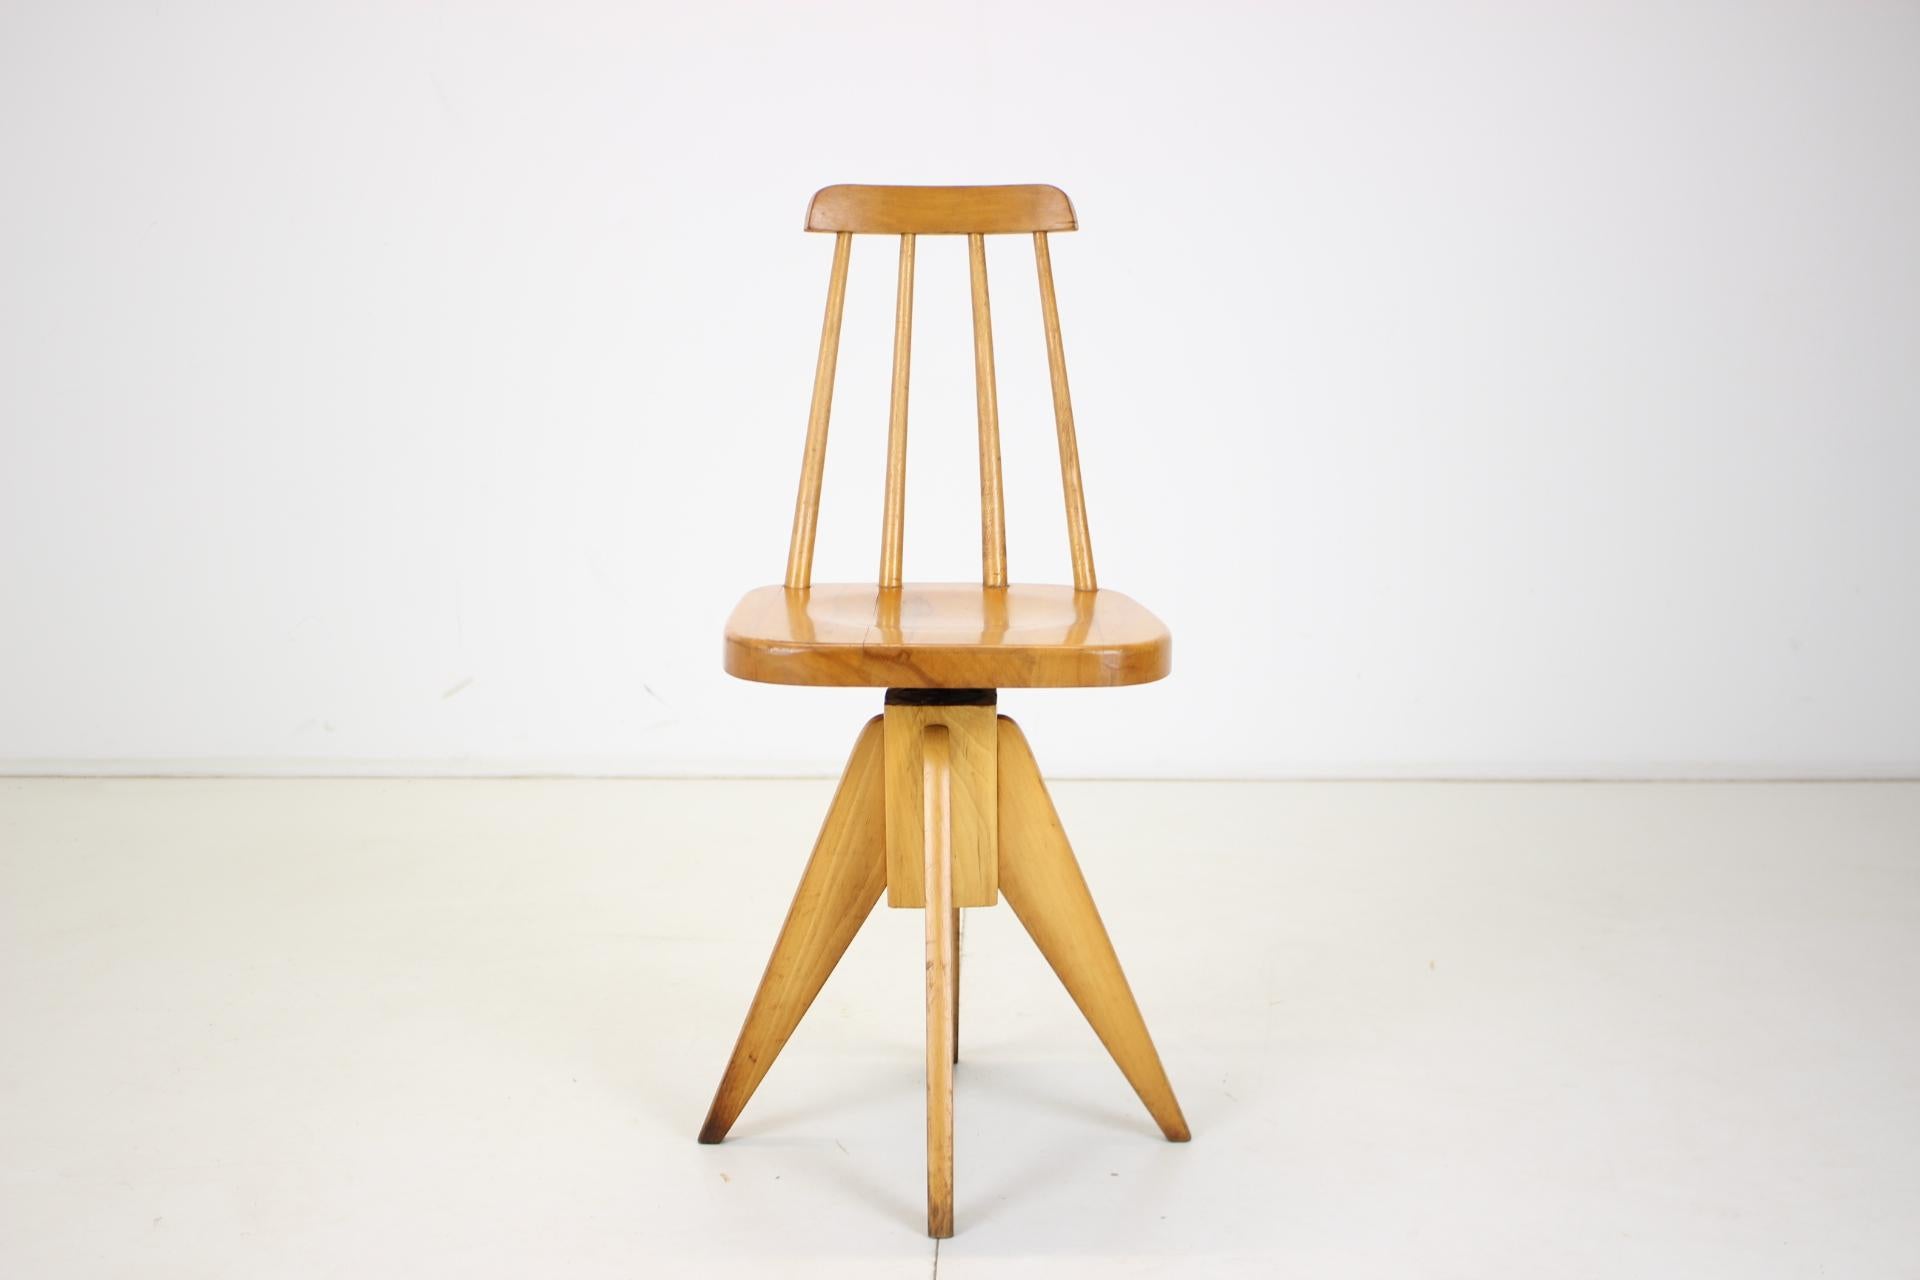 - In original condition
- Fully functional
- Measures: Adjustable seat height 63cm-44cm.